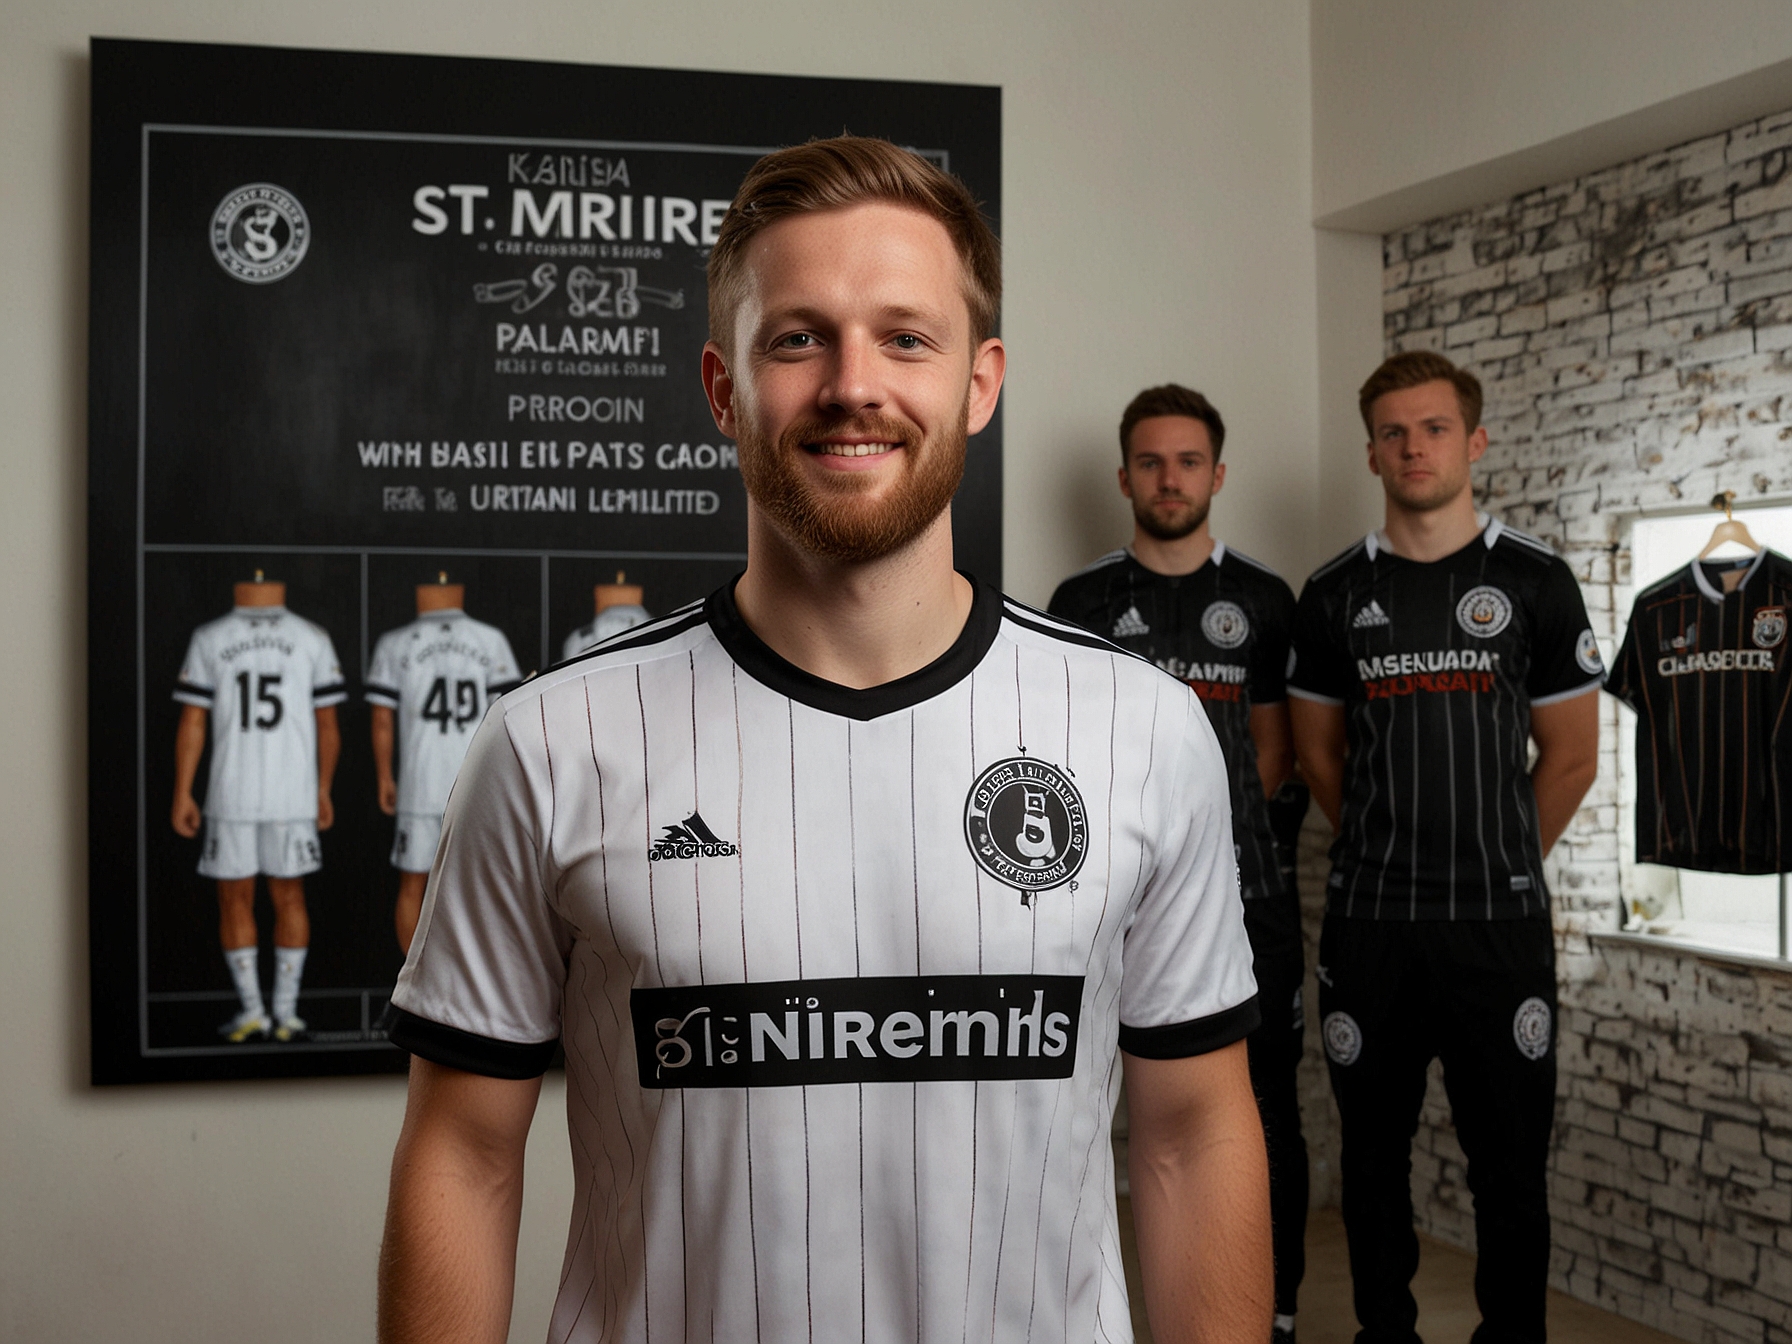 St Mirren players showcasing the newly unveiled kit, with 'Lord, let Paisley [and St Mirren] flourish' slogan. The kit highlights modern design while honoring the club’s heritage.